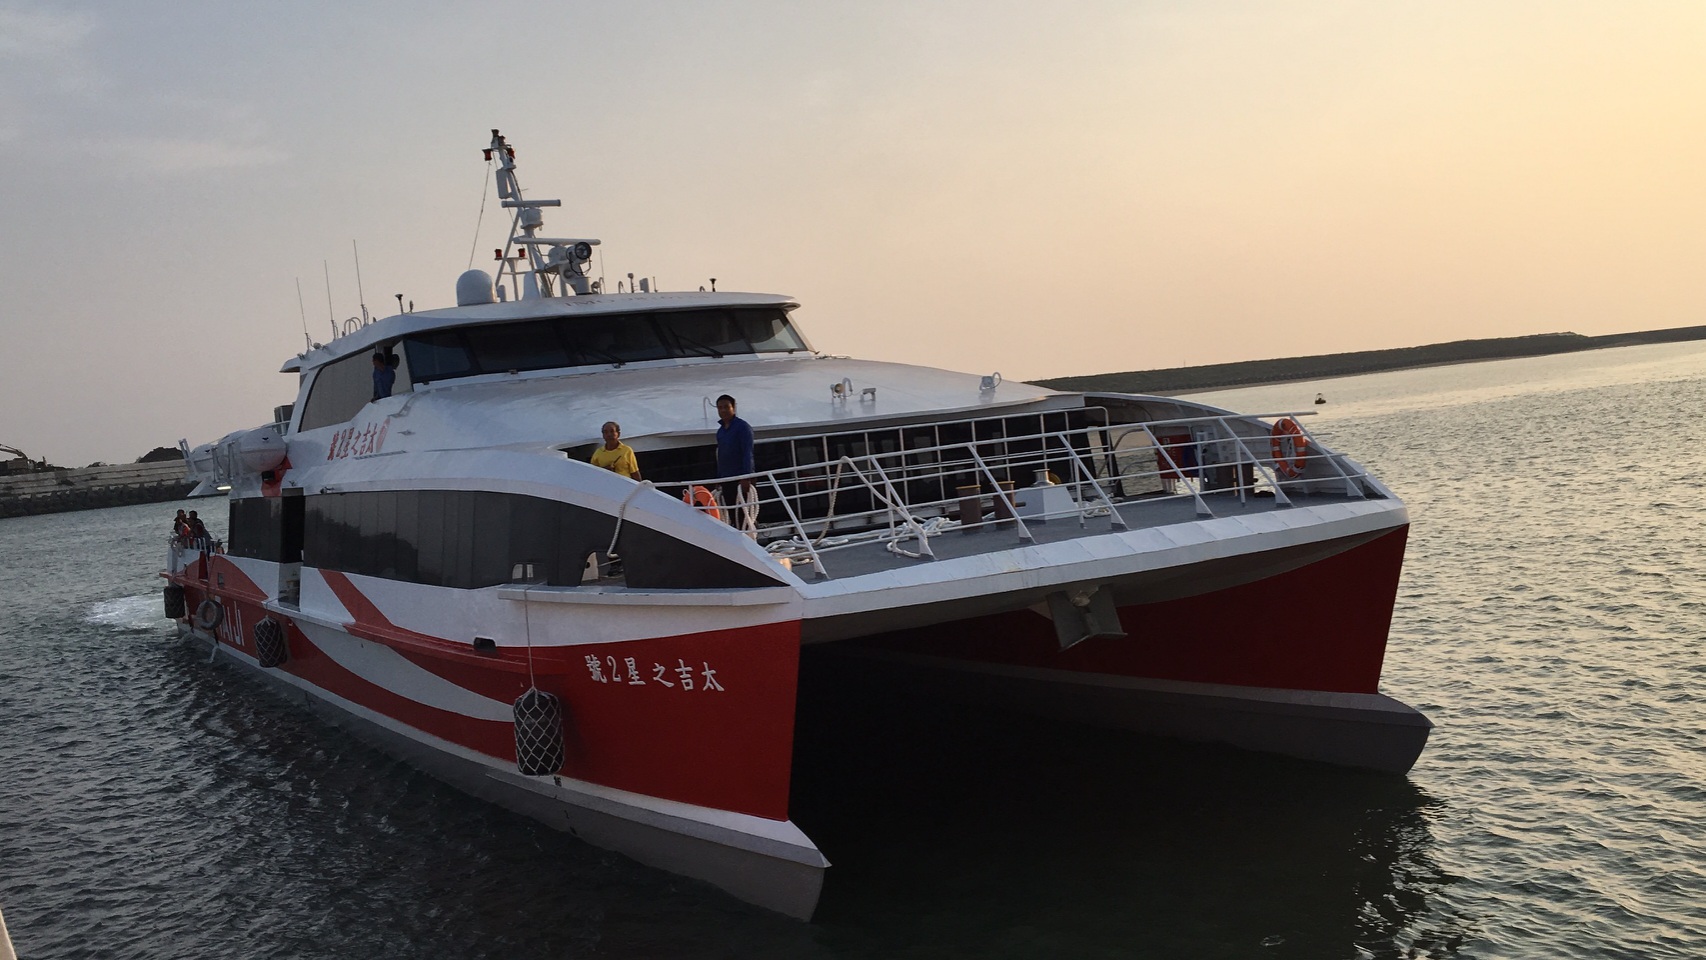 [SALE] Ferry Ticket (Round Trip) from Chiayi to Penghu (3 Days) Sale 41 ...